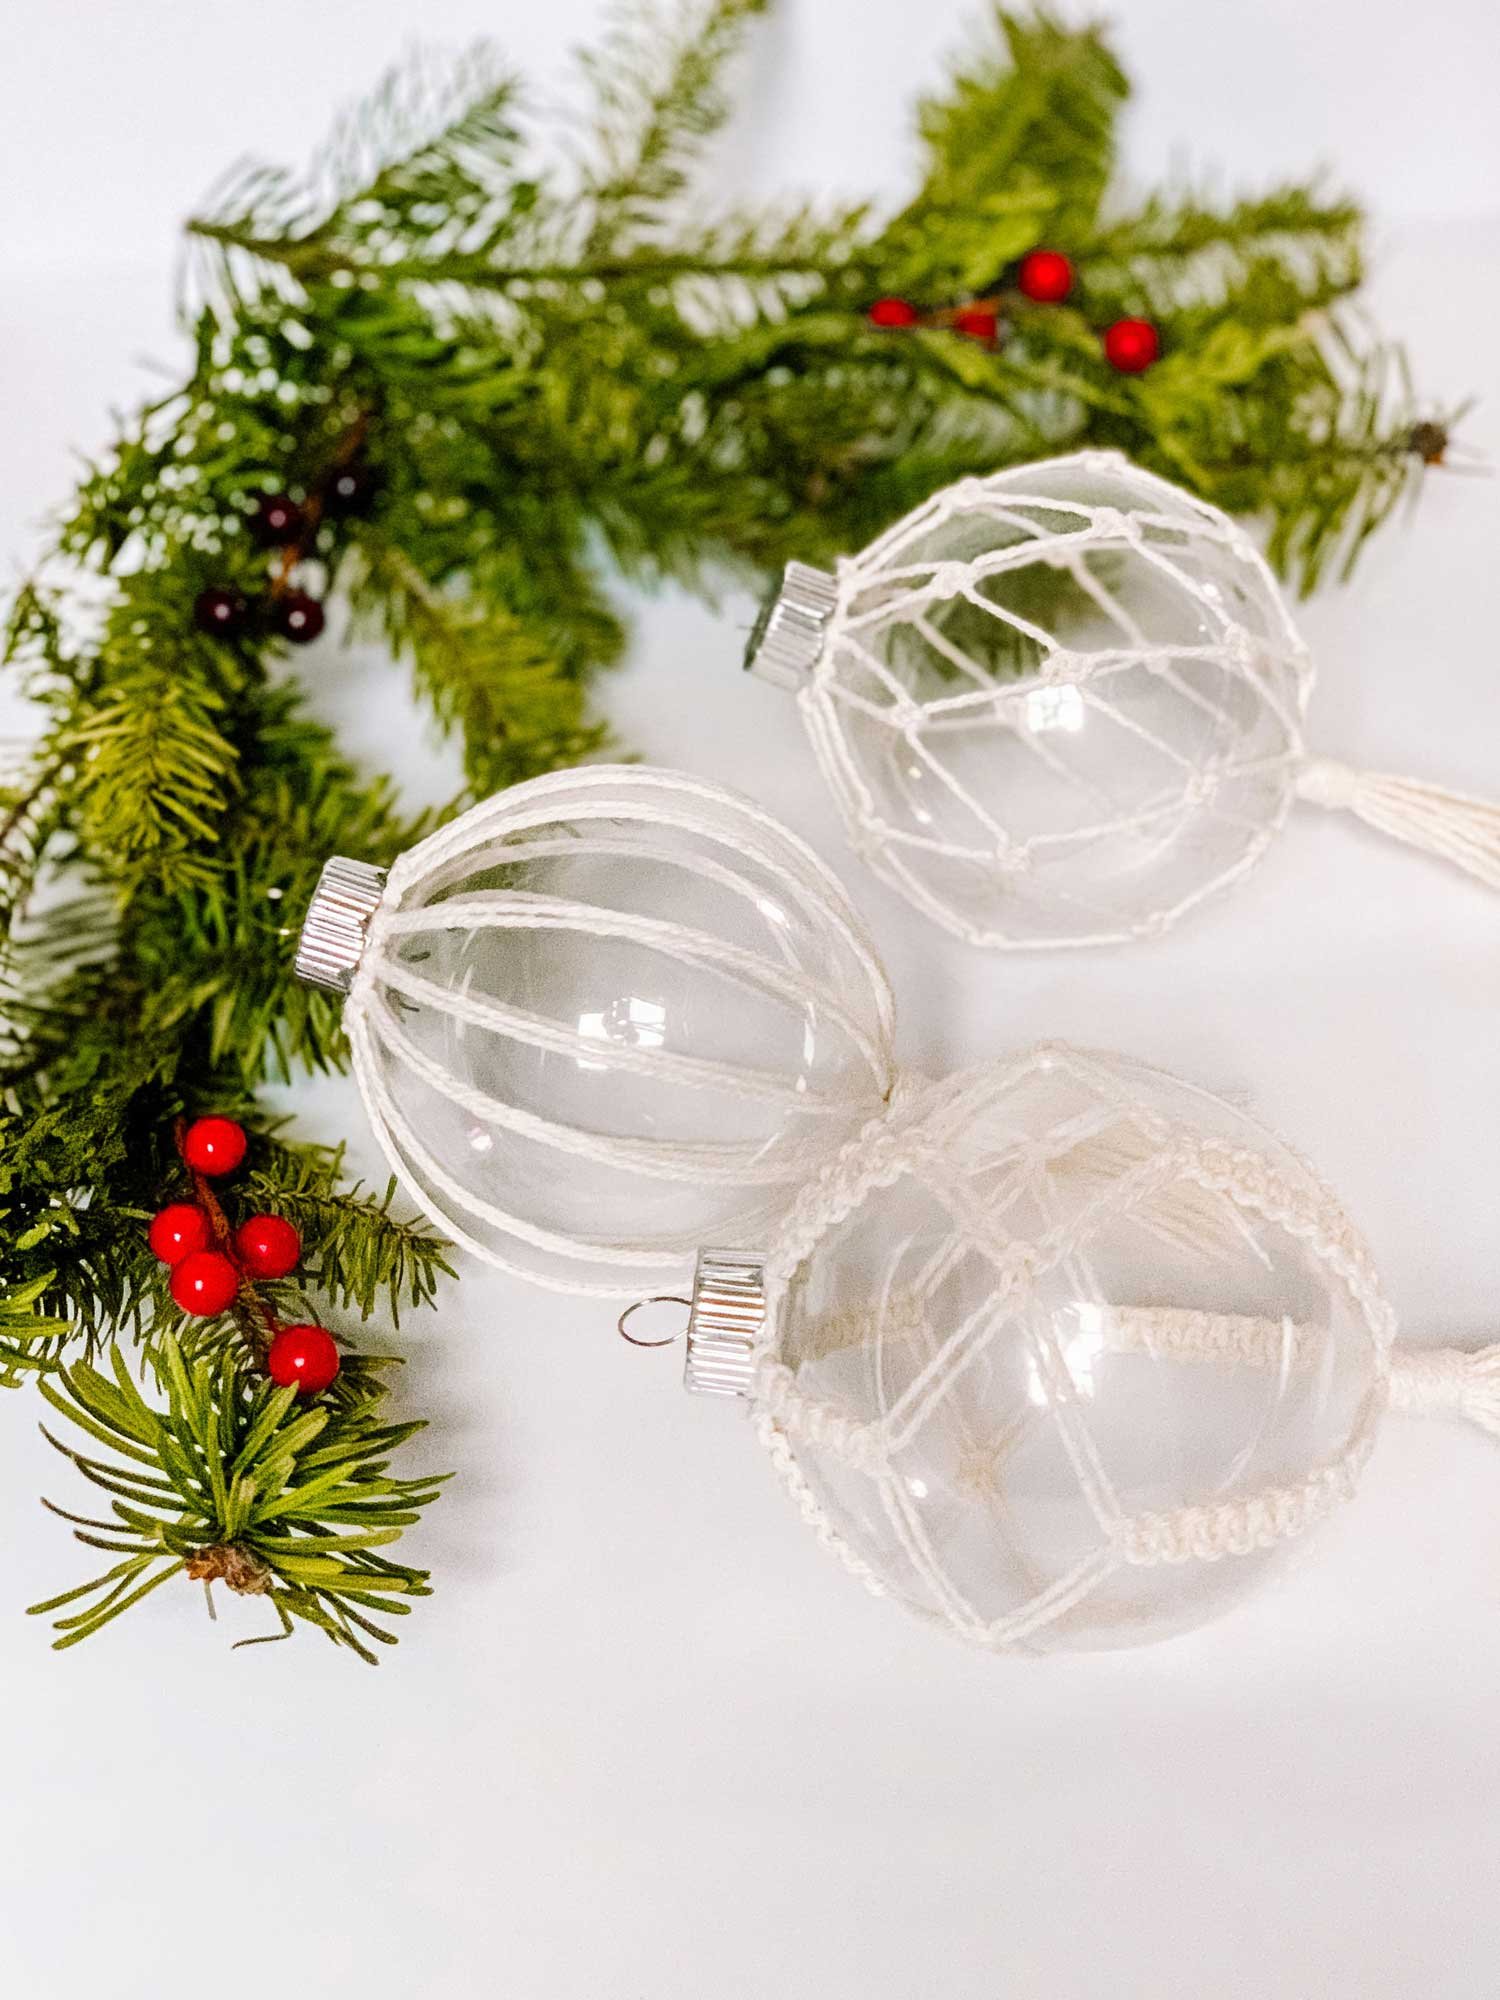 DIY Clear Christmas Ornament: Candy Canes in Glass 